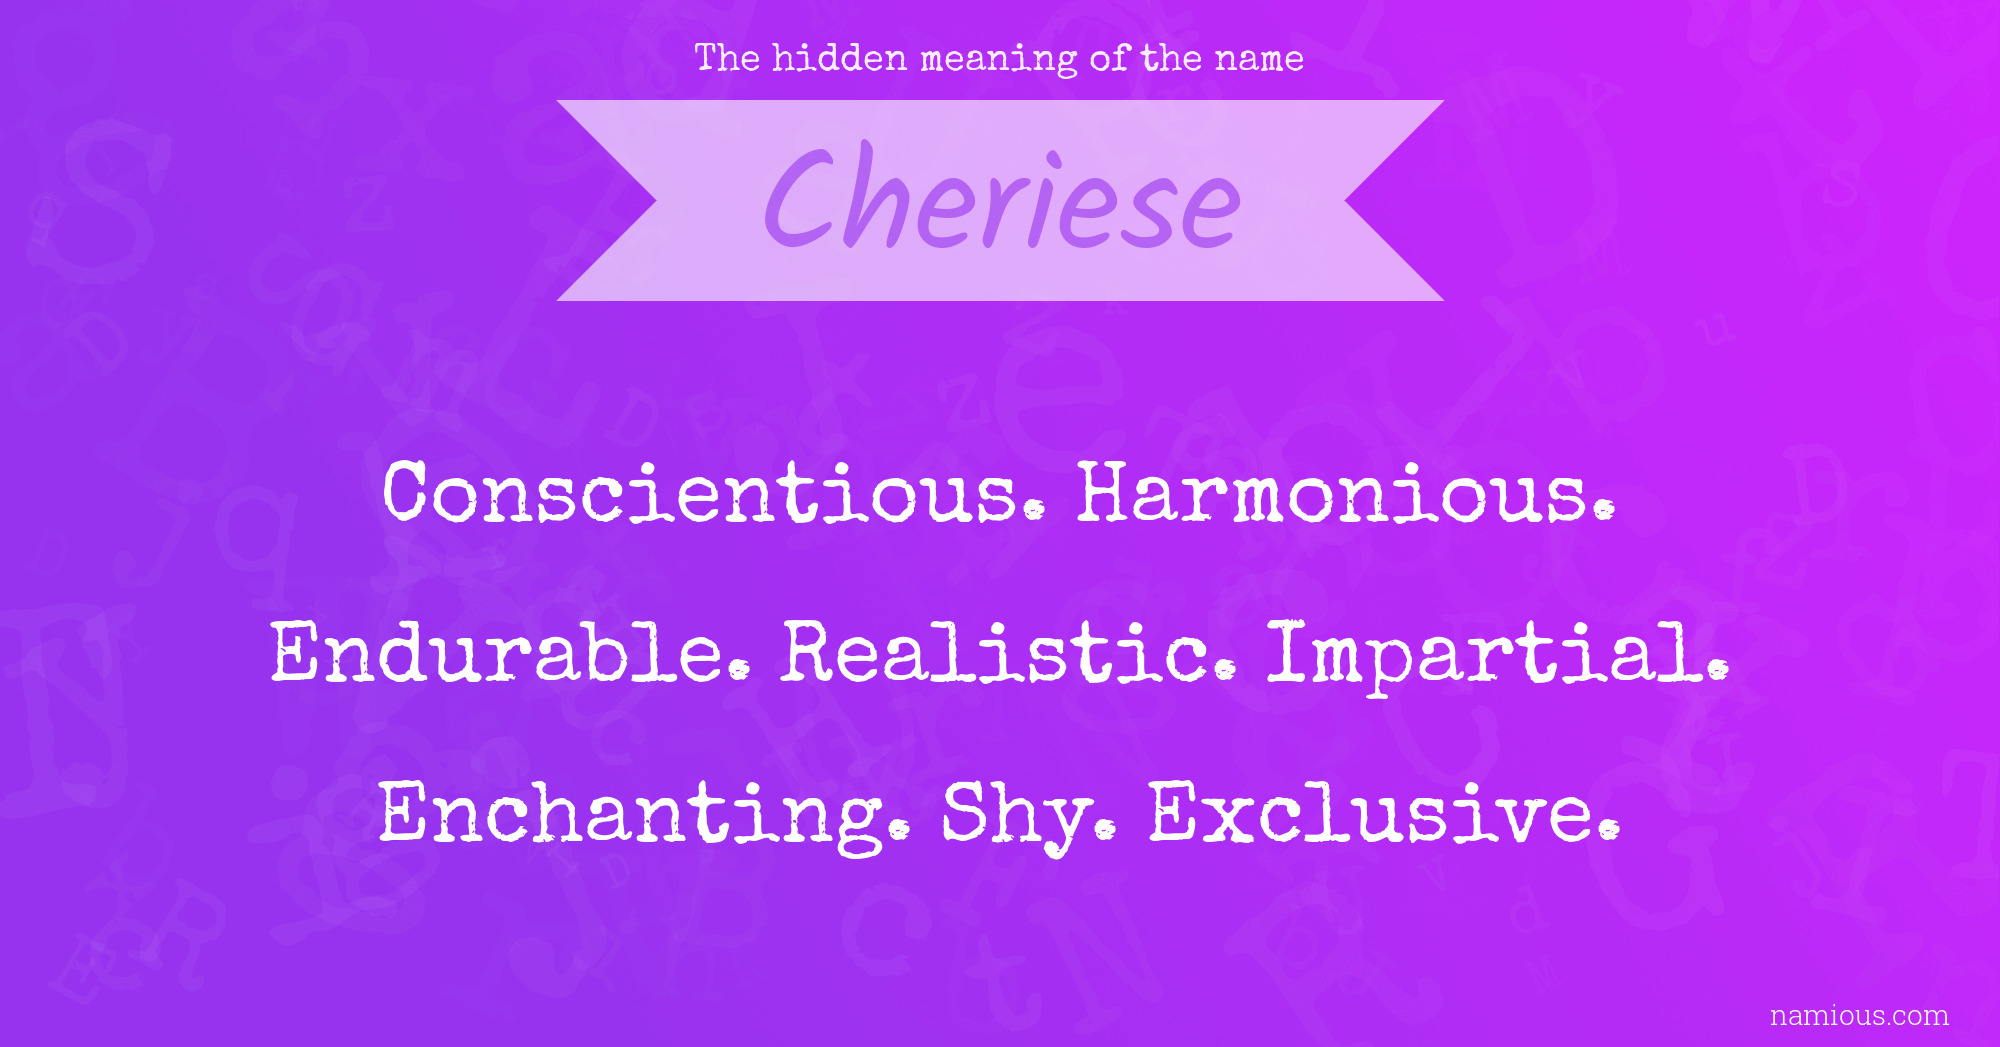 The hidden meaning of the name Cheriese